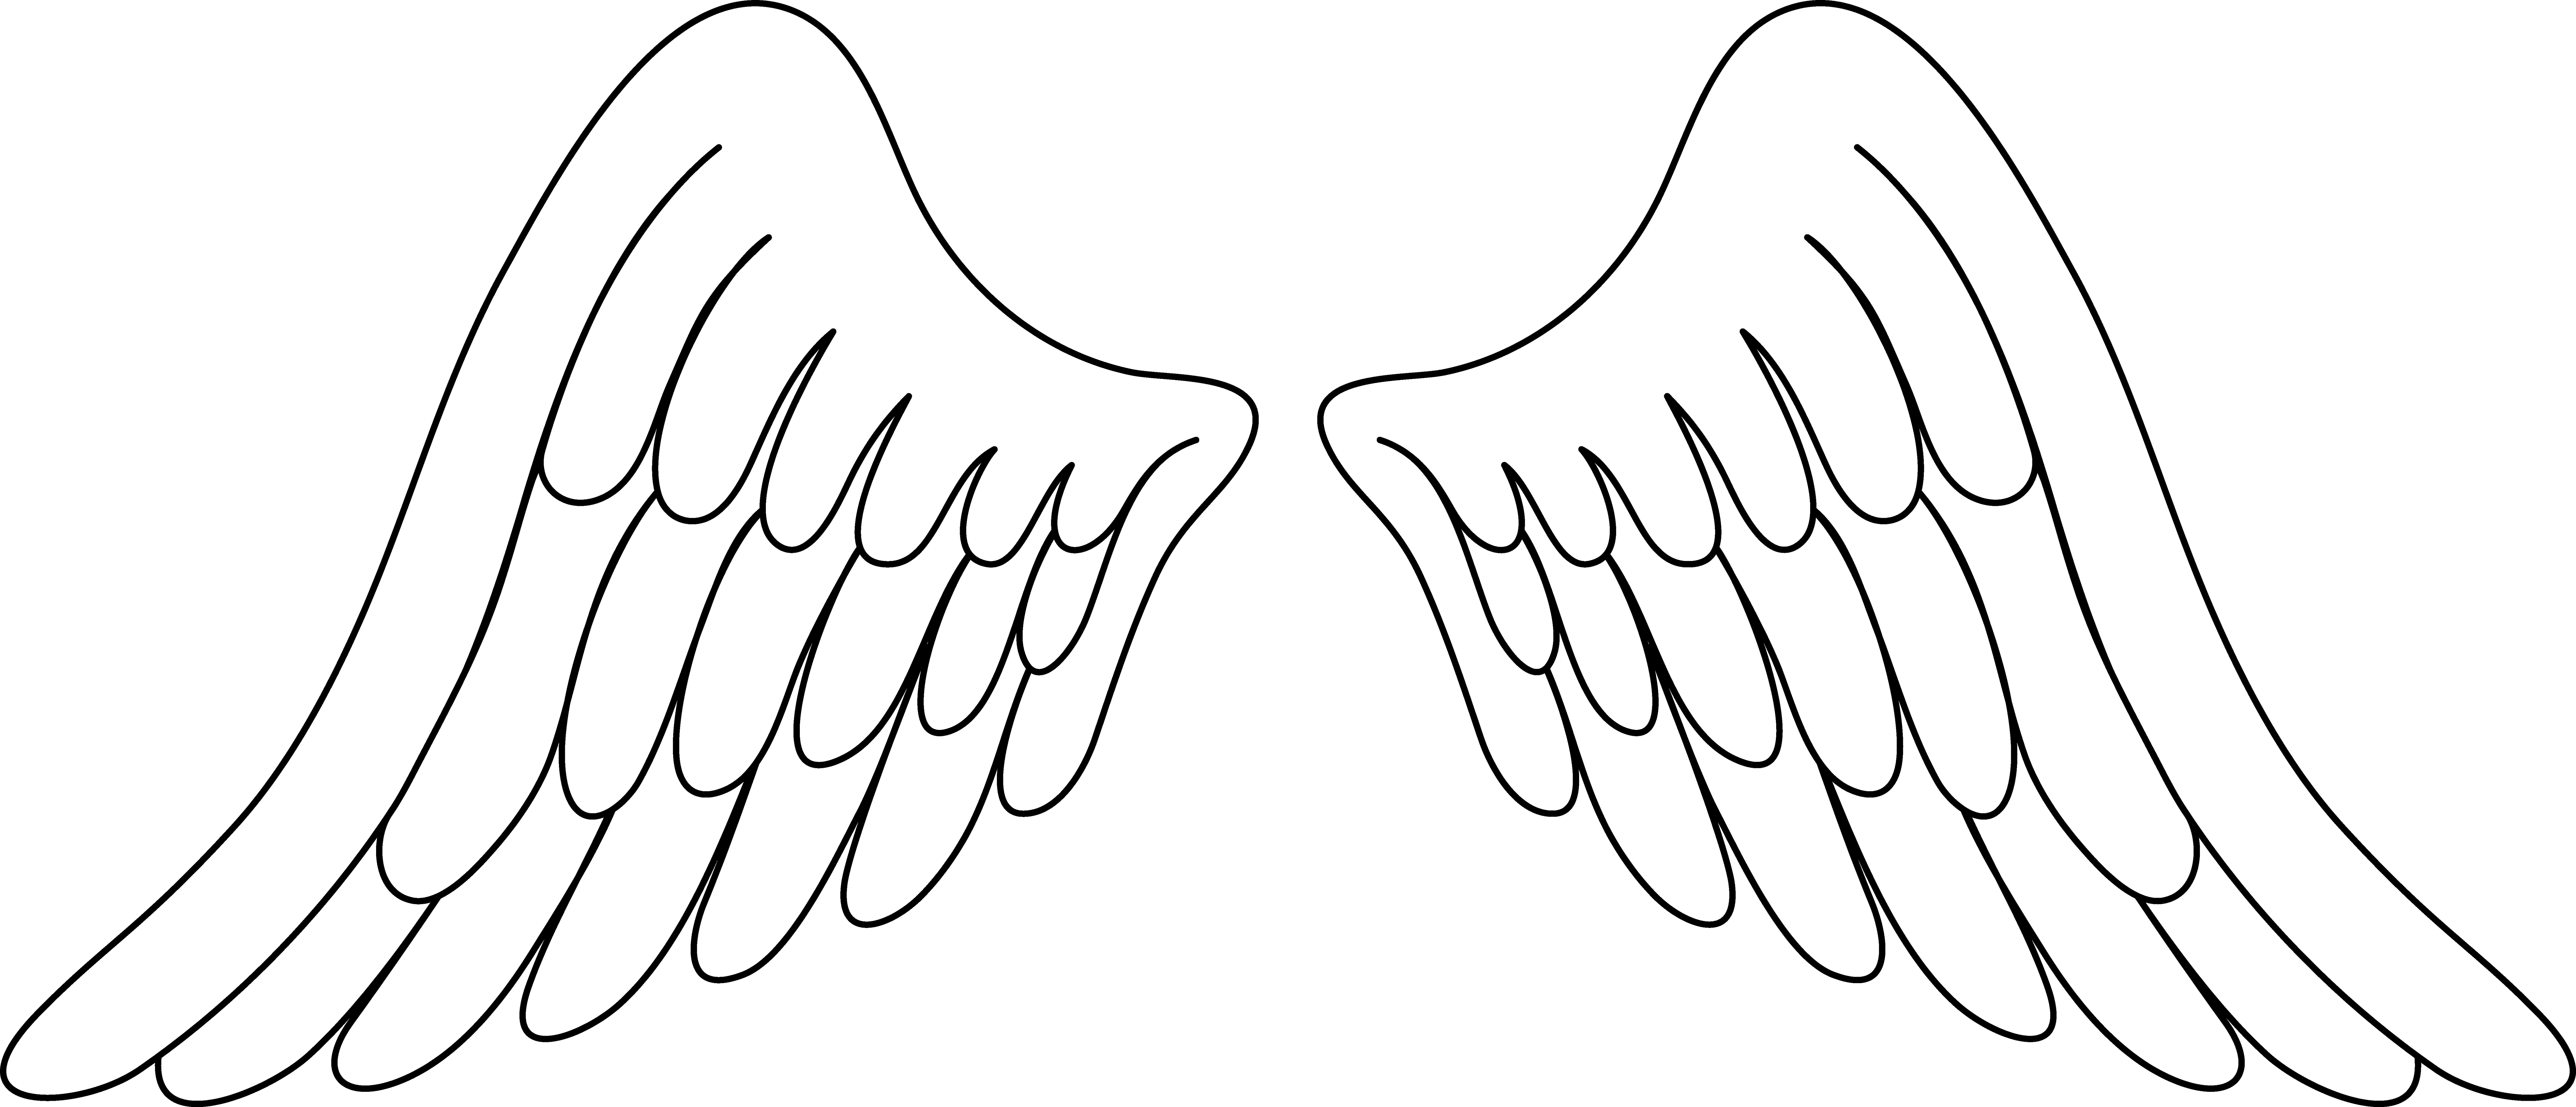 Angel Wings Outline Images  Pictures - Becuo